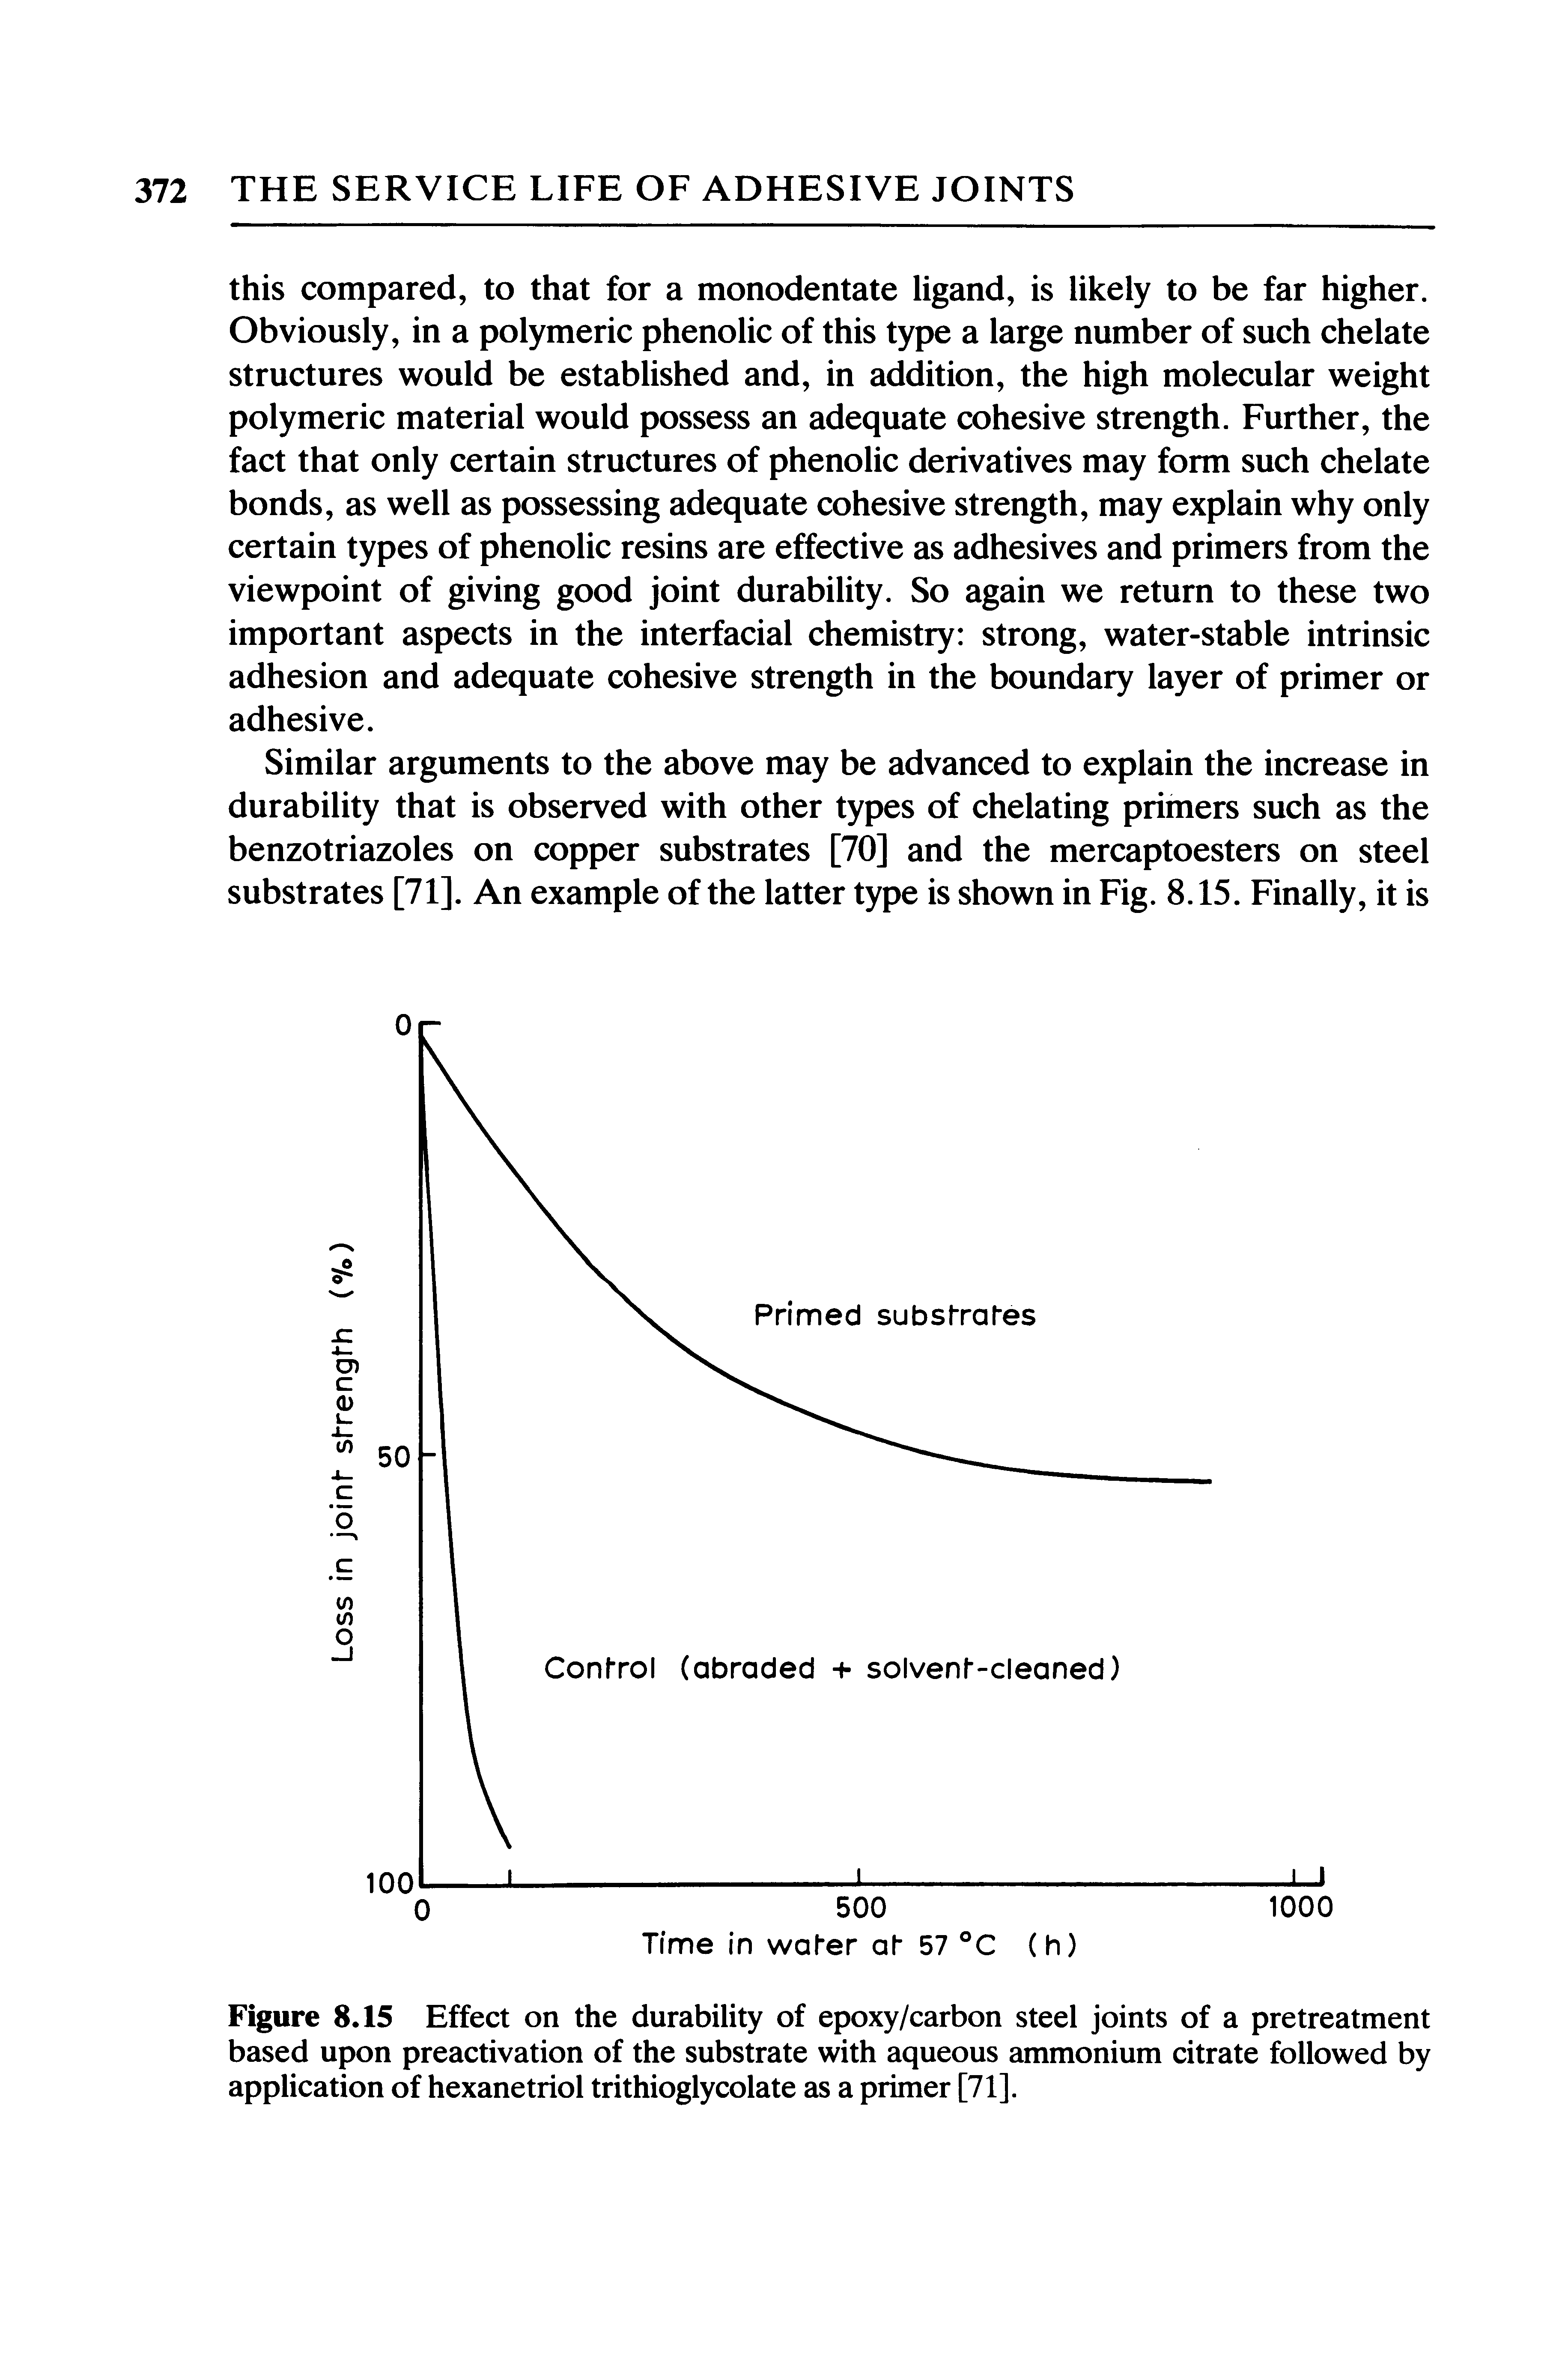 Figure 8.15 Effect on the durability of epoxy/carbon steel joints of a pretreatment based upon preactivation of the substrate with aqueous ammonium citrate followed by application of hexanetriol trithioglycolate as a primer [71].